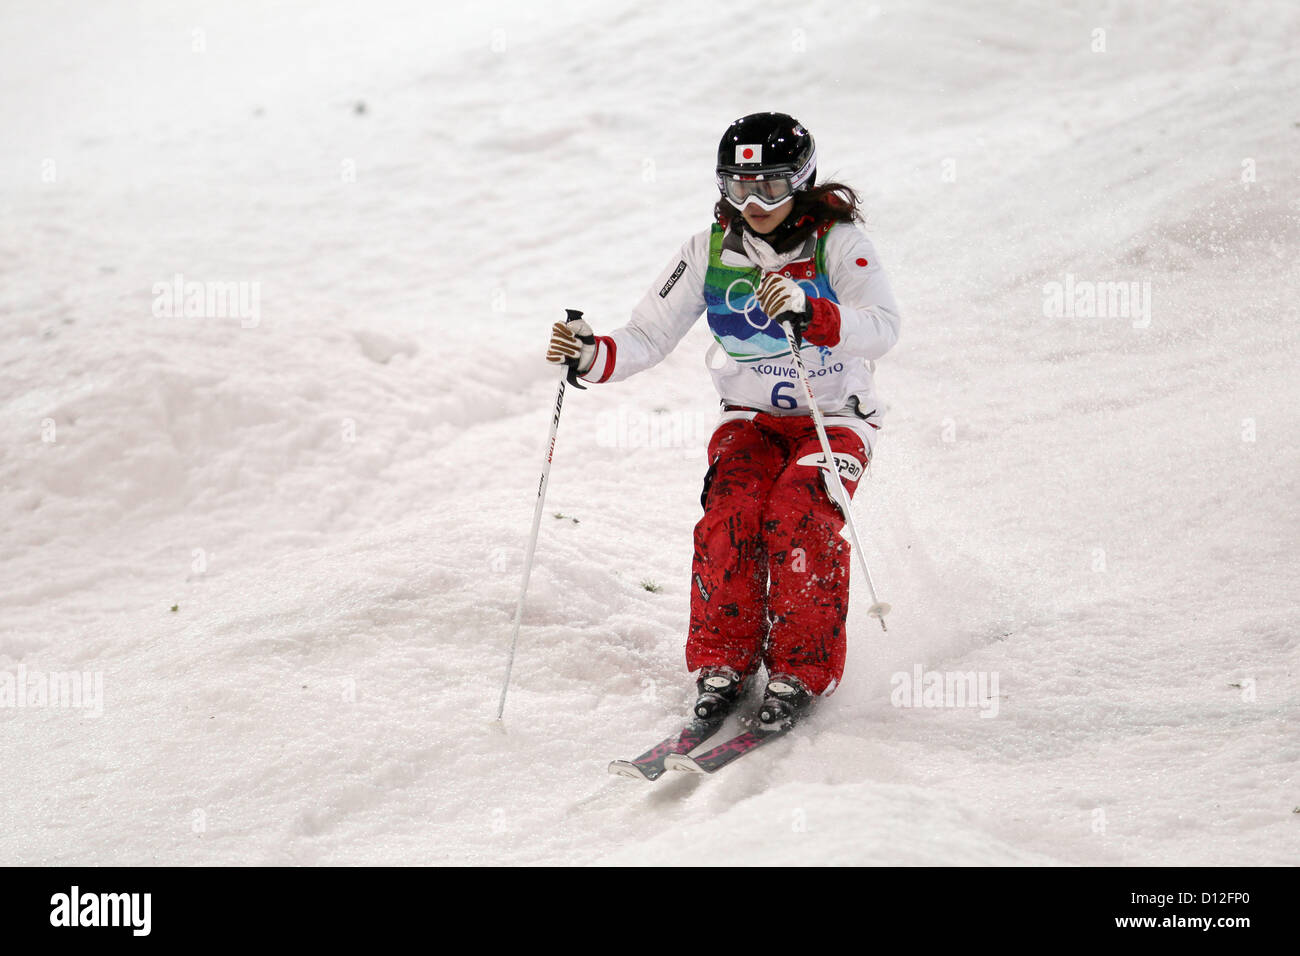 Aiko Uemura (JPN),  FEBRUARY 13, 2010 - Moguls :  Aiko Uemura of Japan during practice session before the women's freestyle skiing moguls final on Cypress Mountain at the Vancouver 2010 Olympics in Vancouver, British Columbia, Canada.   (Photo by Akihiro Sugimoto/AFLO SPORT) [1080] Stock Photo